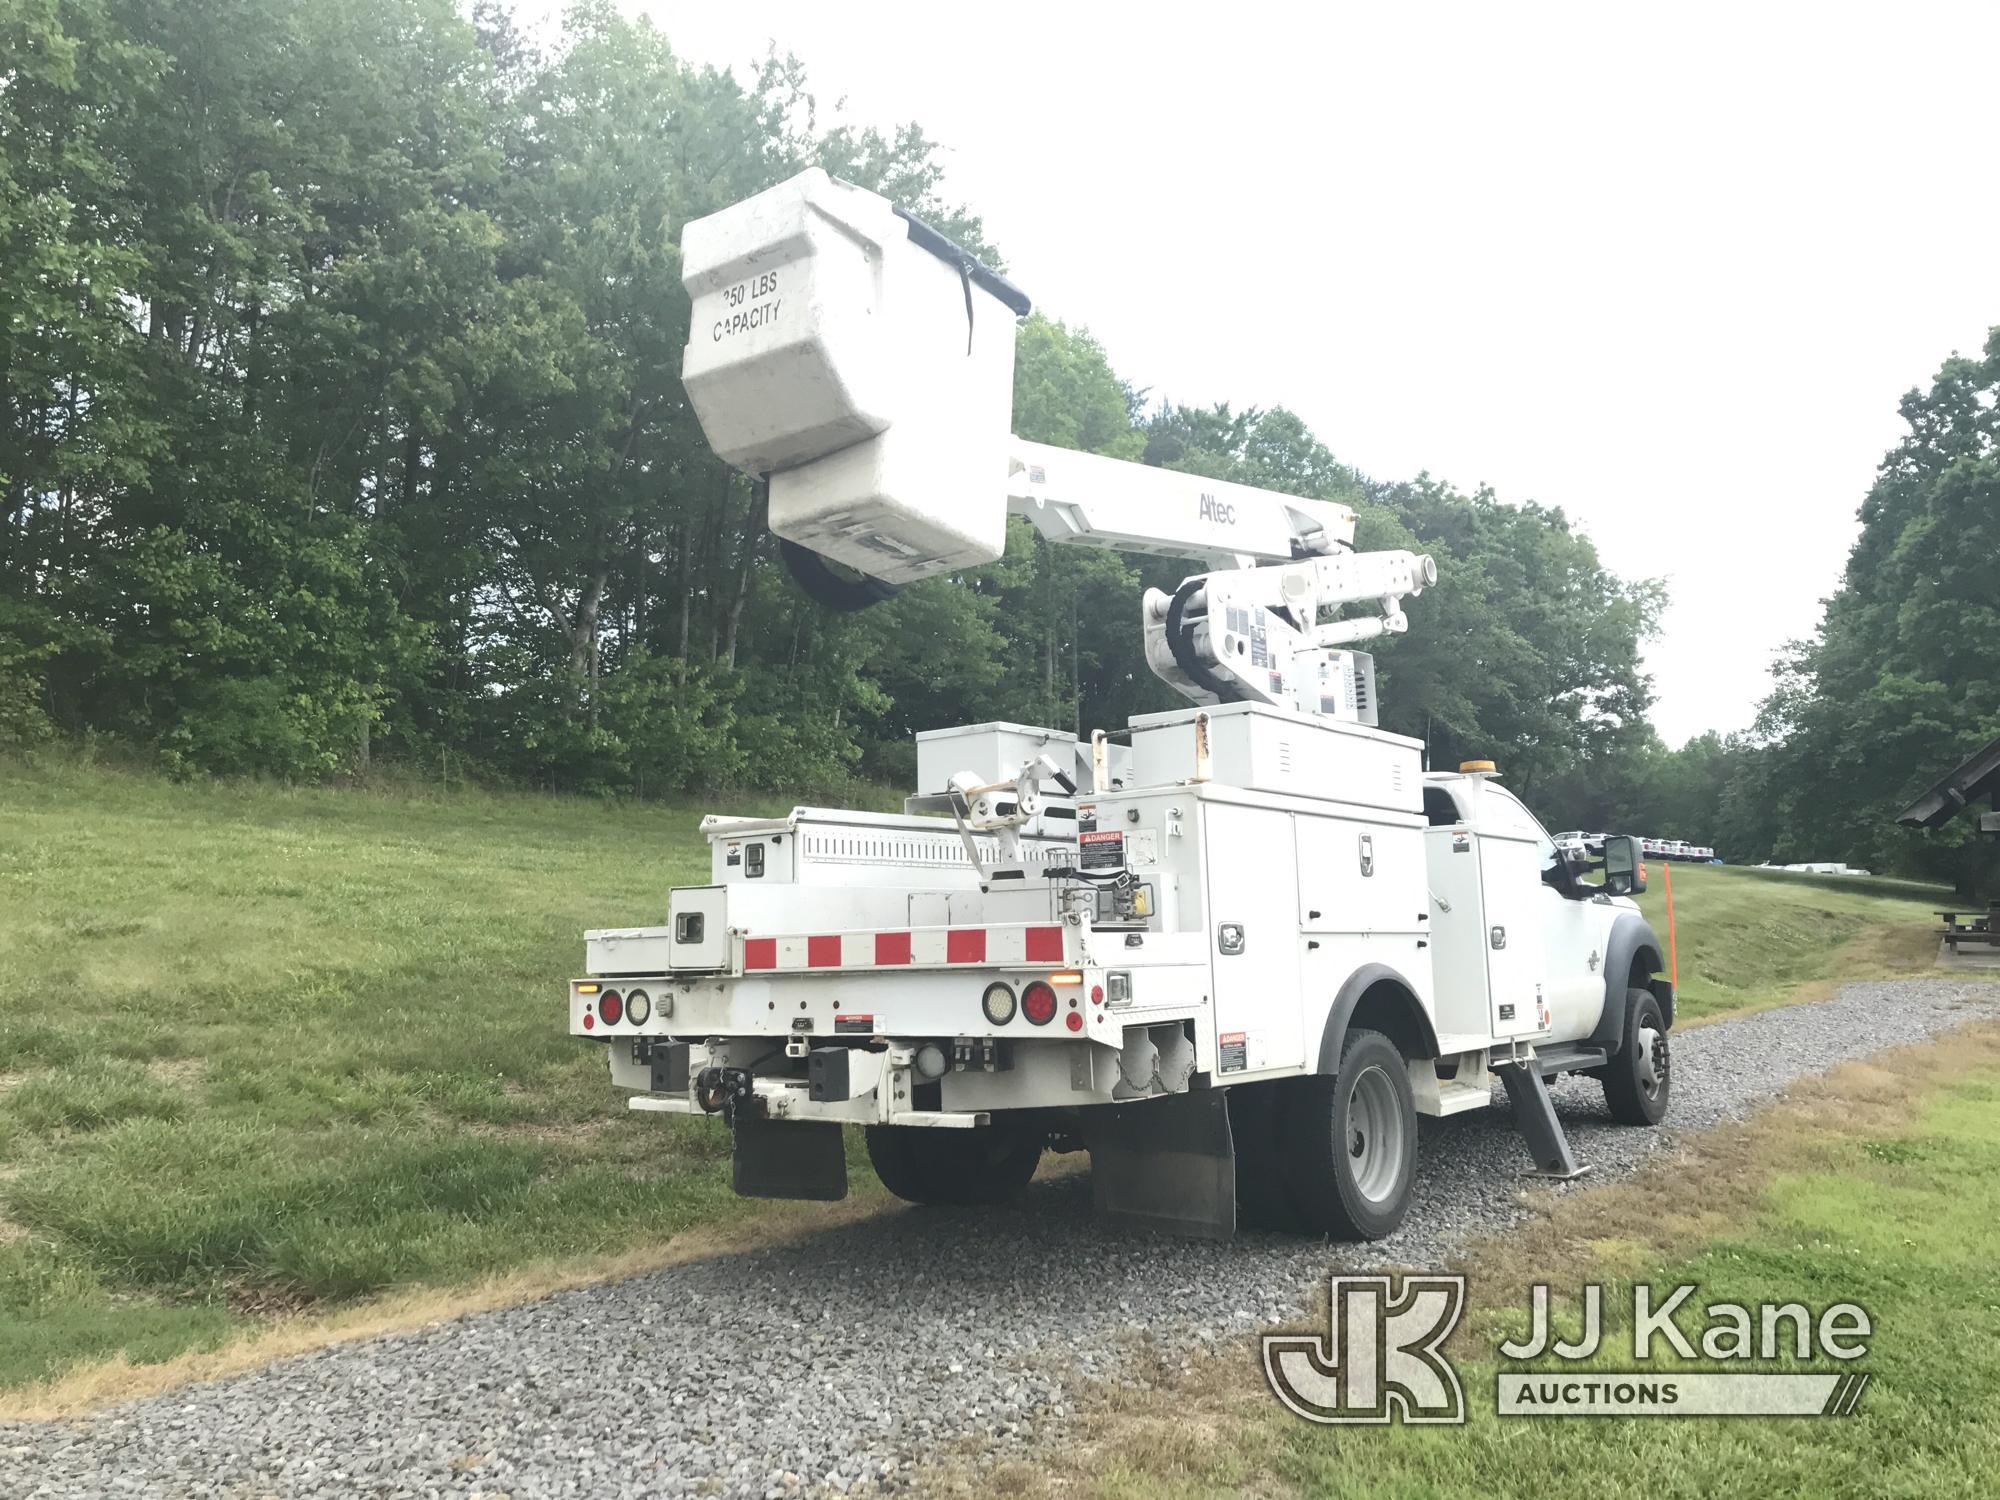 (Mount Airy, NC) Altec AT40-MH, Articulating & Telescopic Material Handling Bucket Truck mounted beh